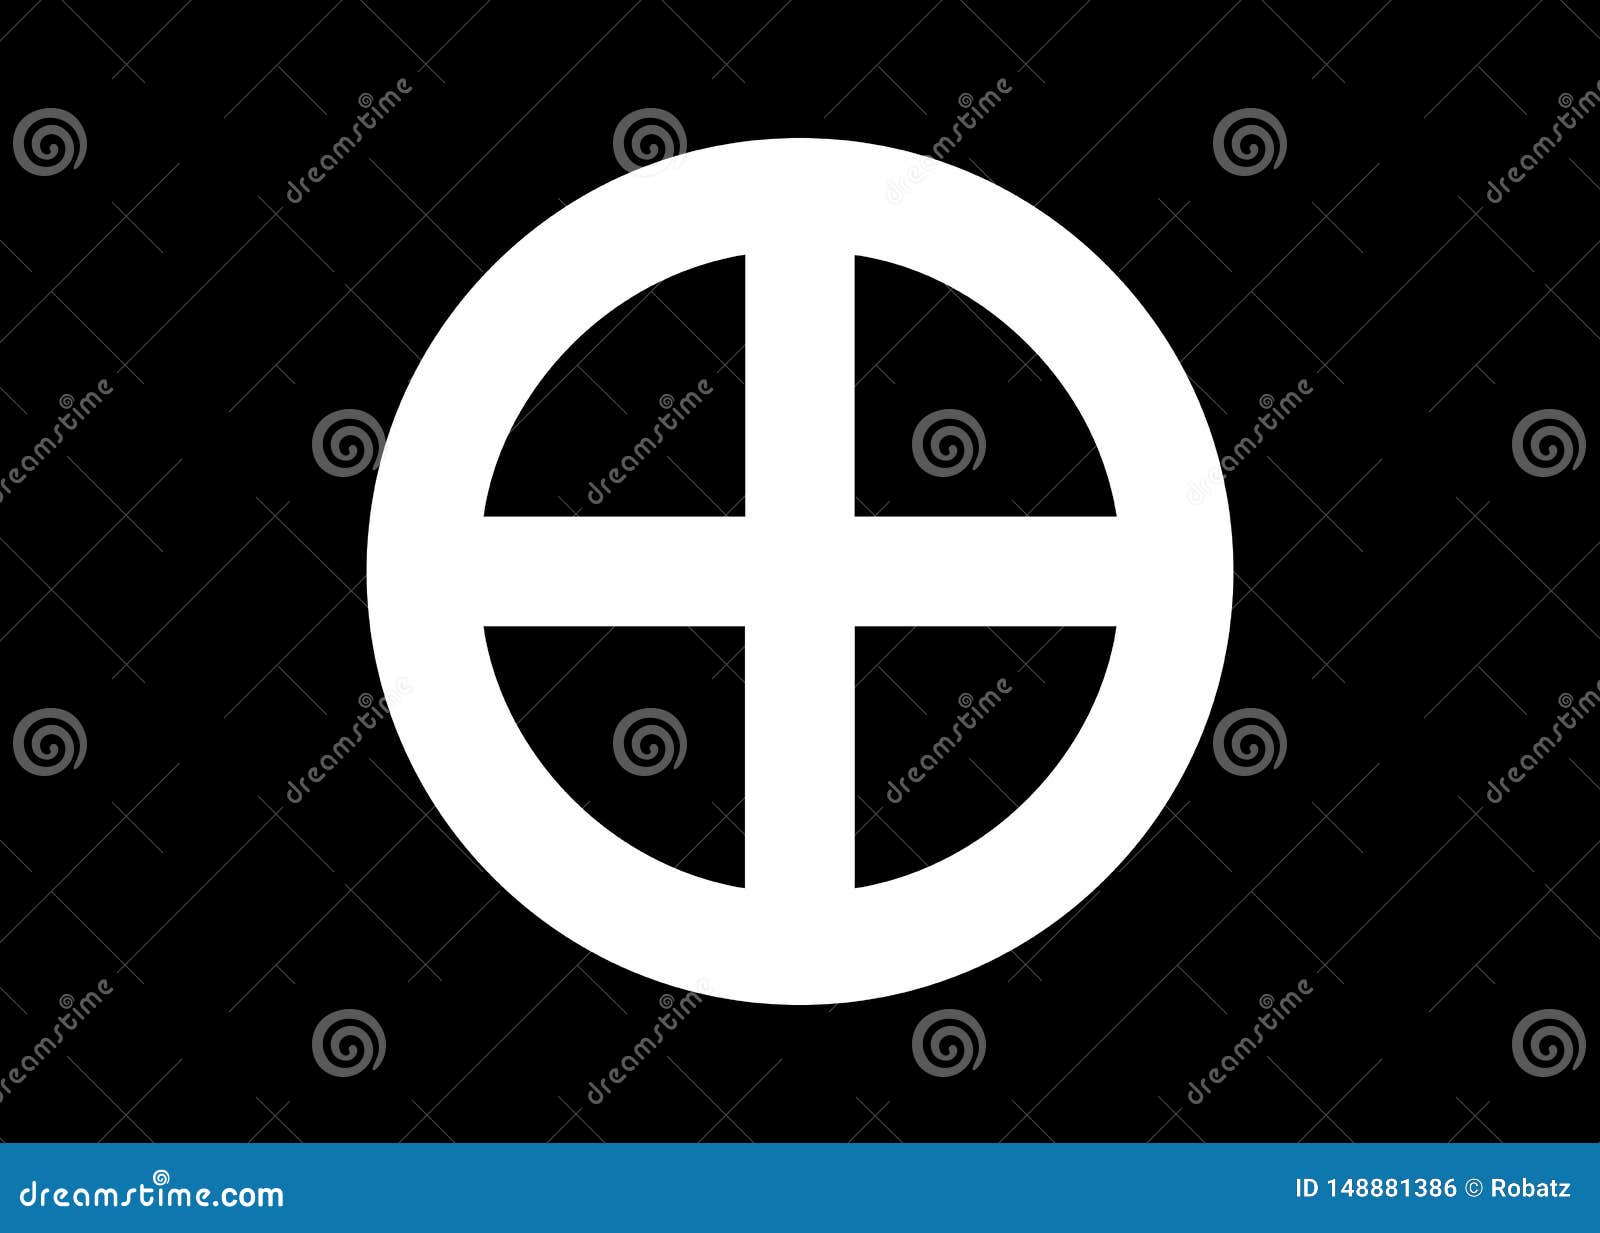 a sun cross, solar cross, or wheel cross is a solar  consisting of an equilateral cross inside a circle. the logo 